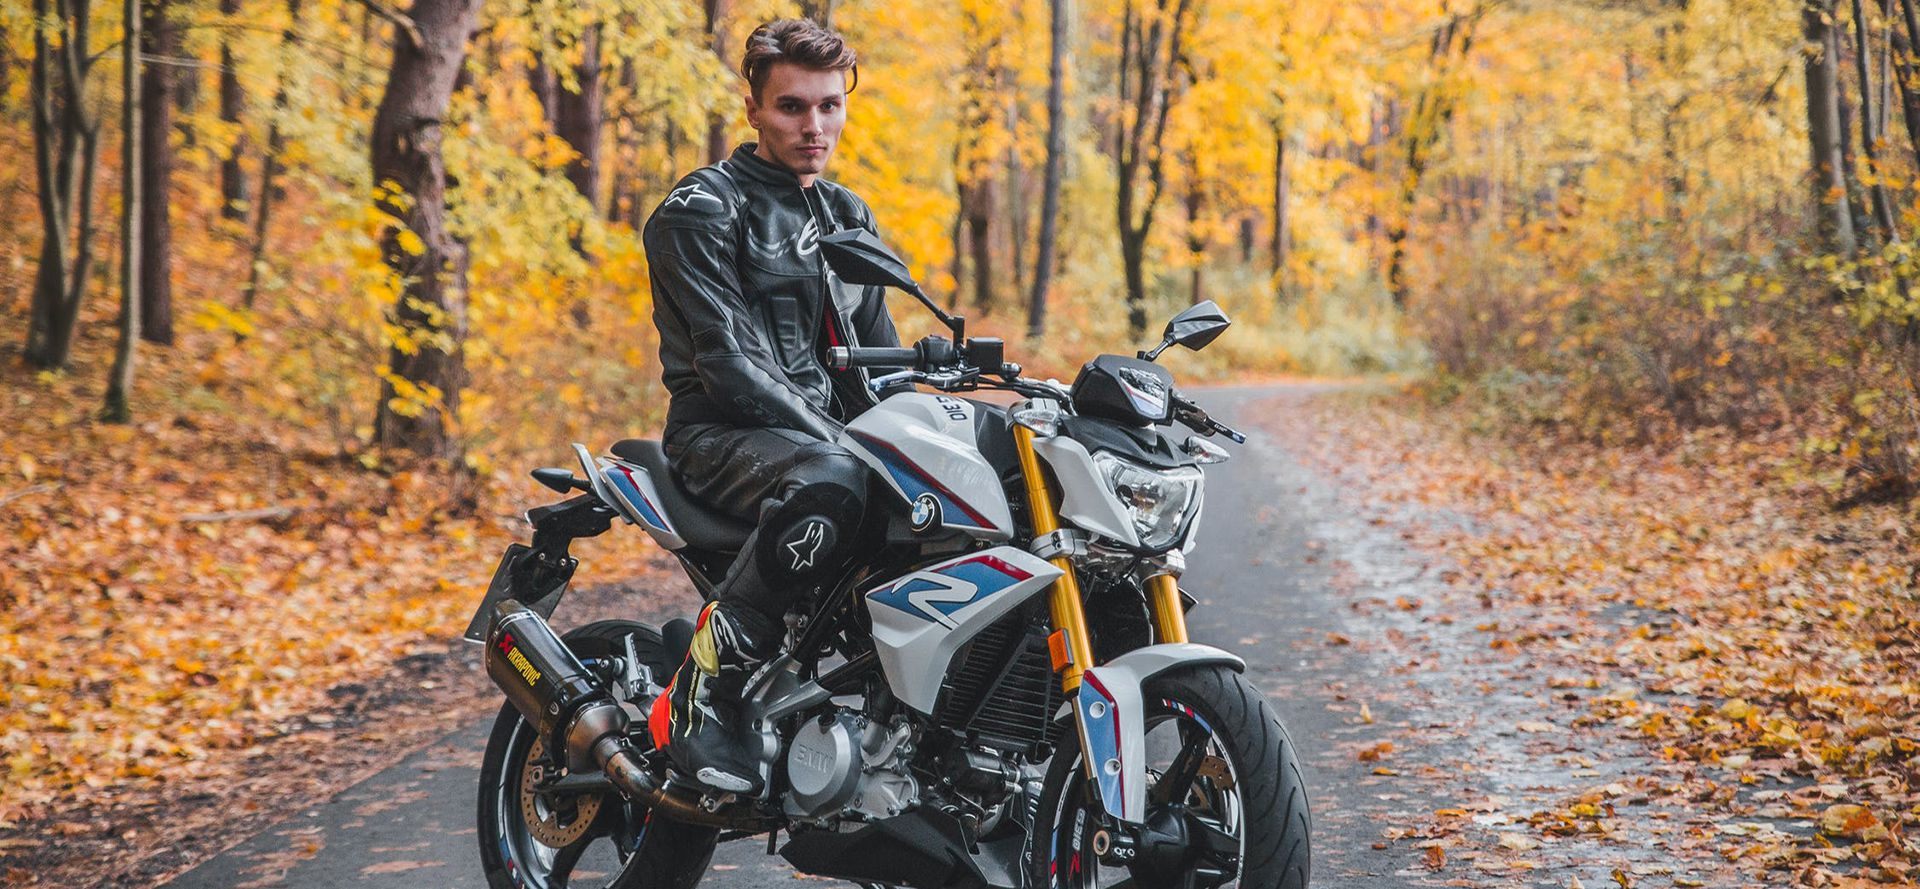 Single biker on a motorcycle against the background of the autumn forest.